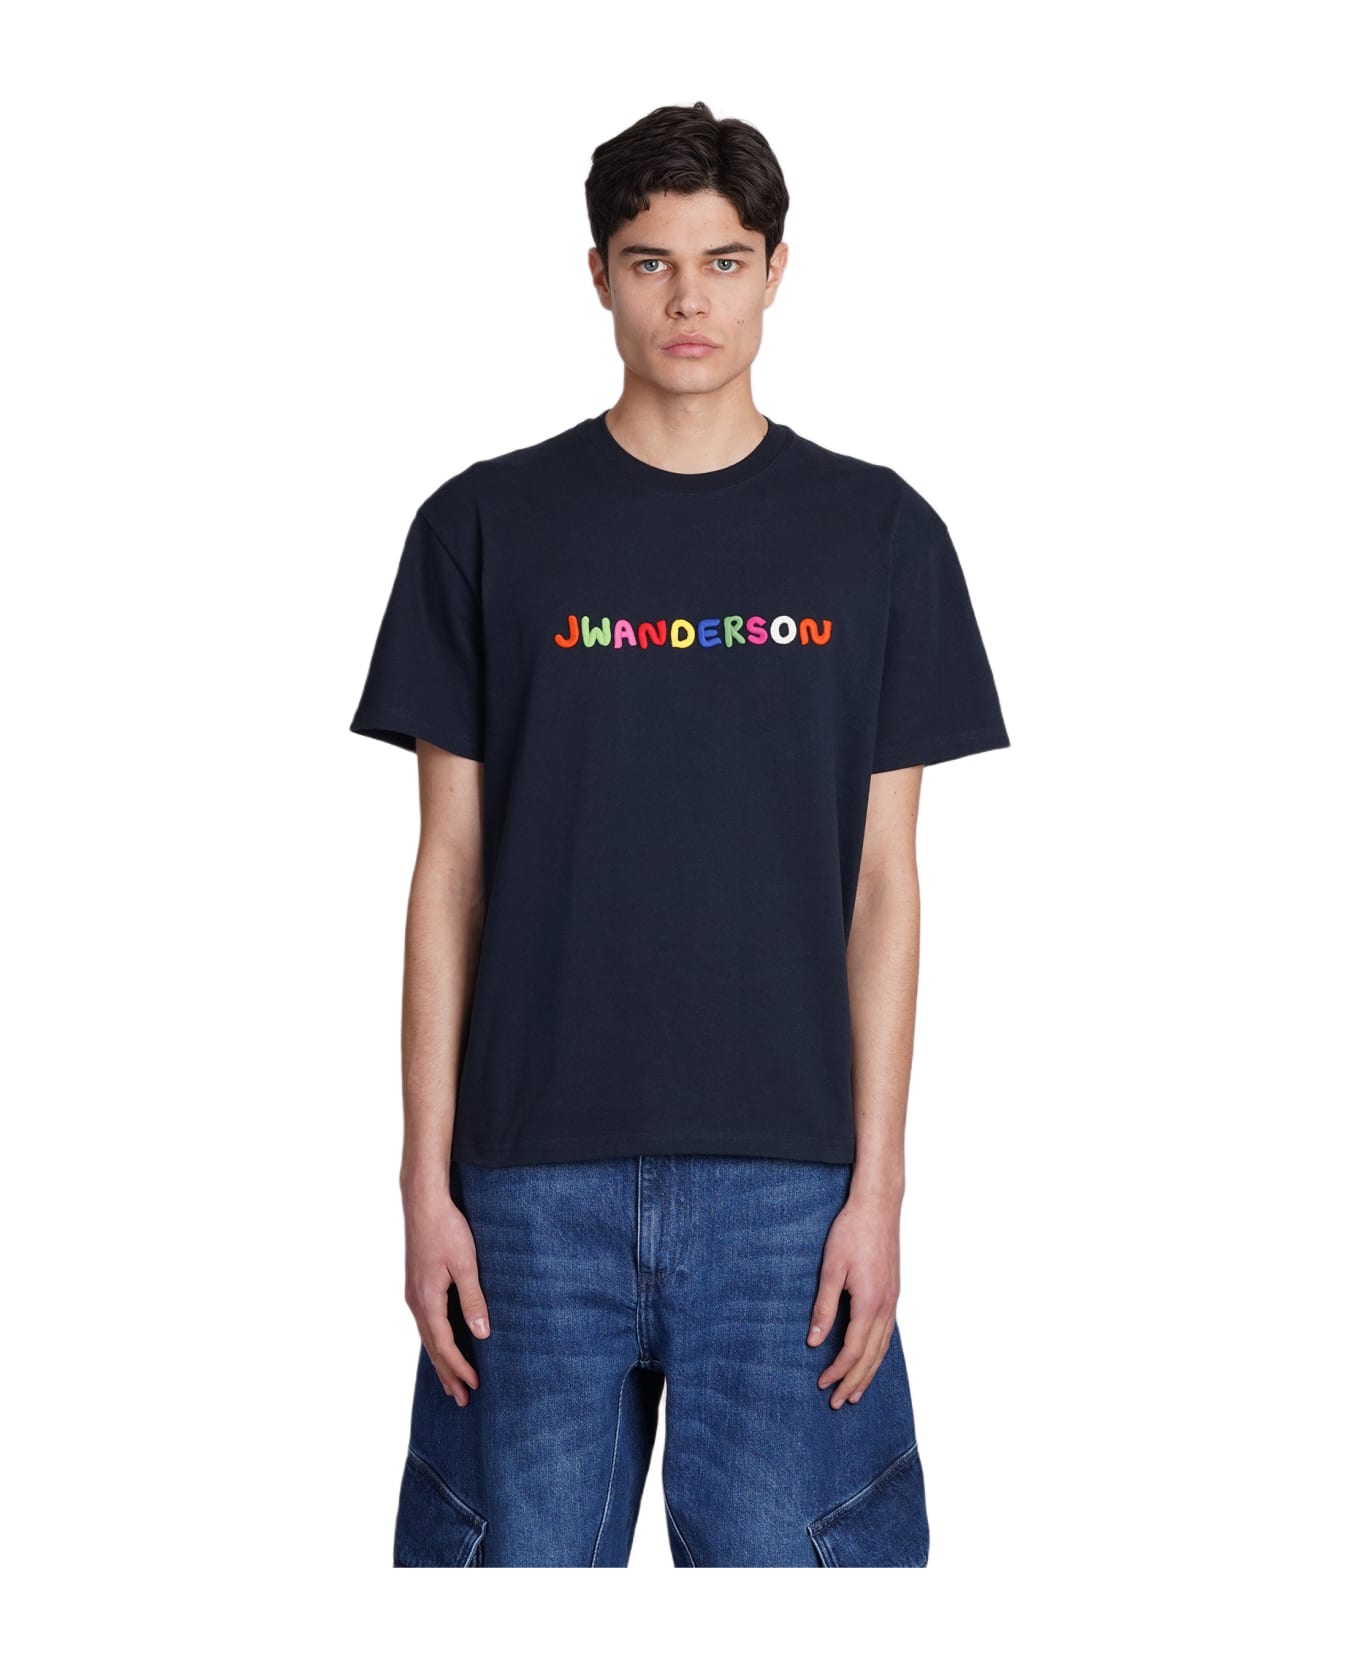 J.W. Anderson T-shirt In Blue Cotton - Navy